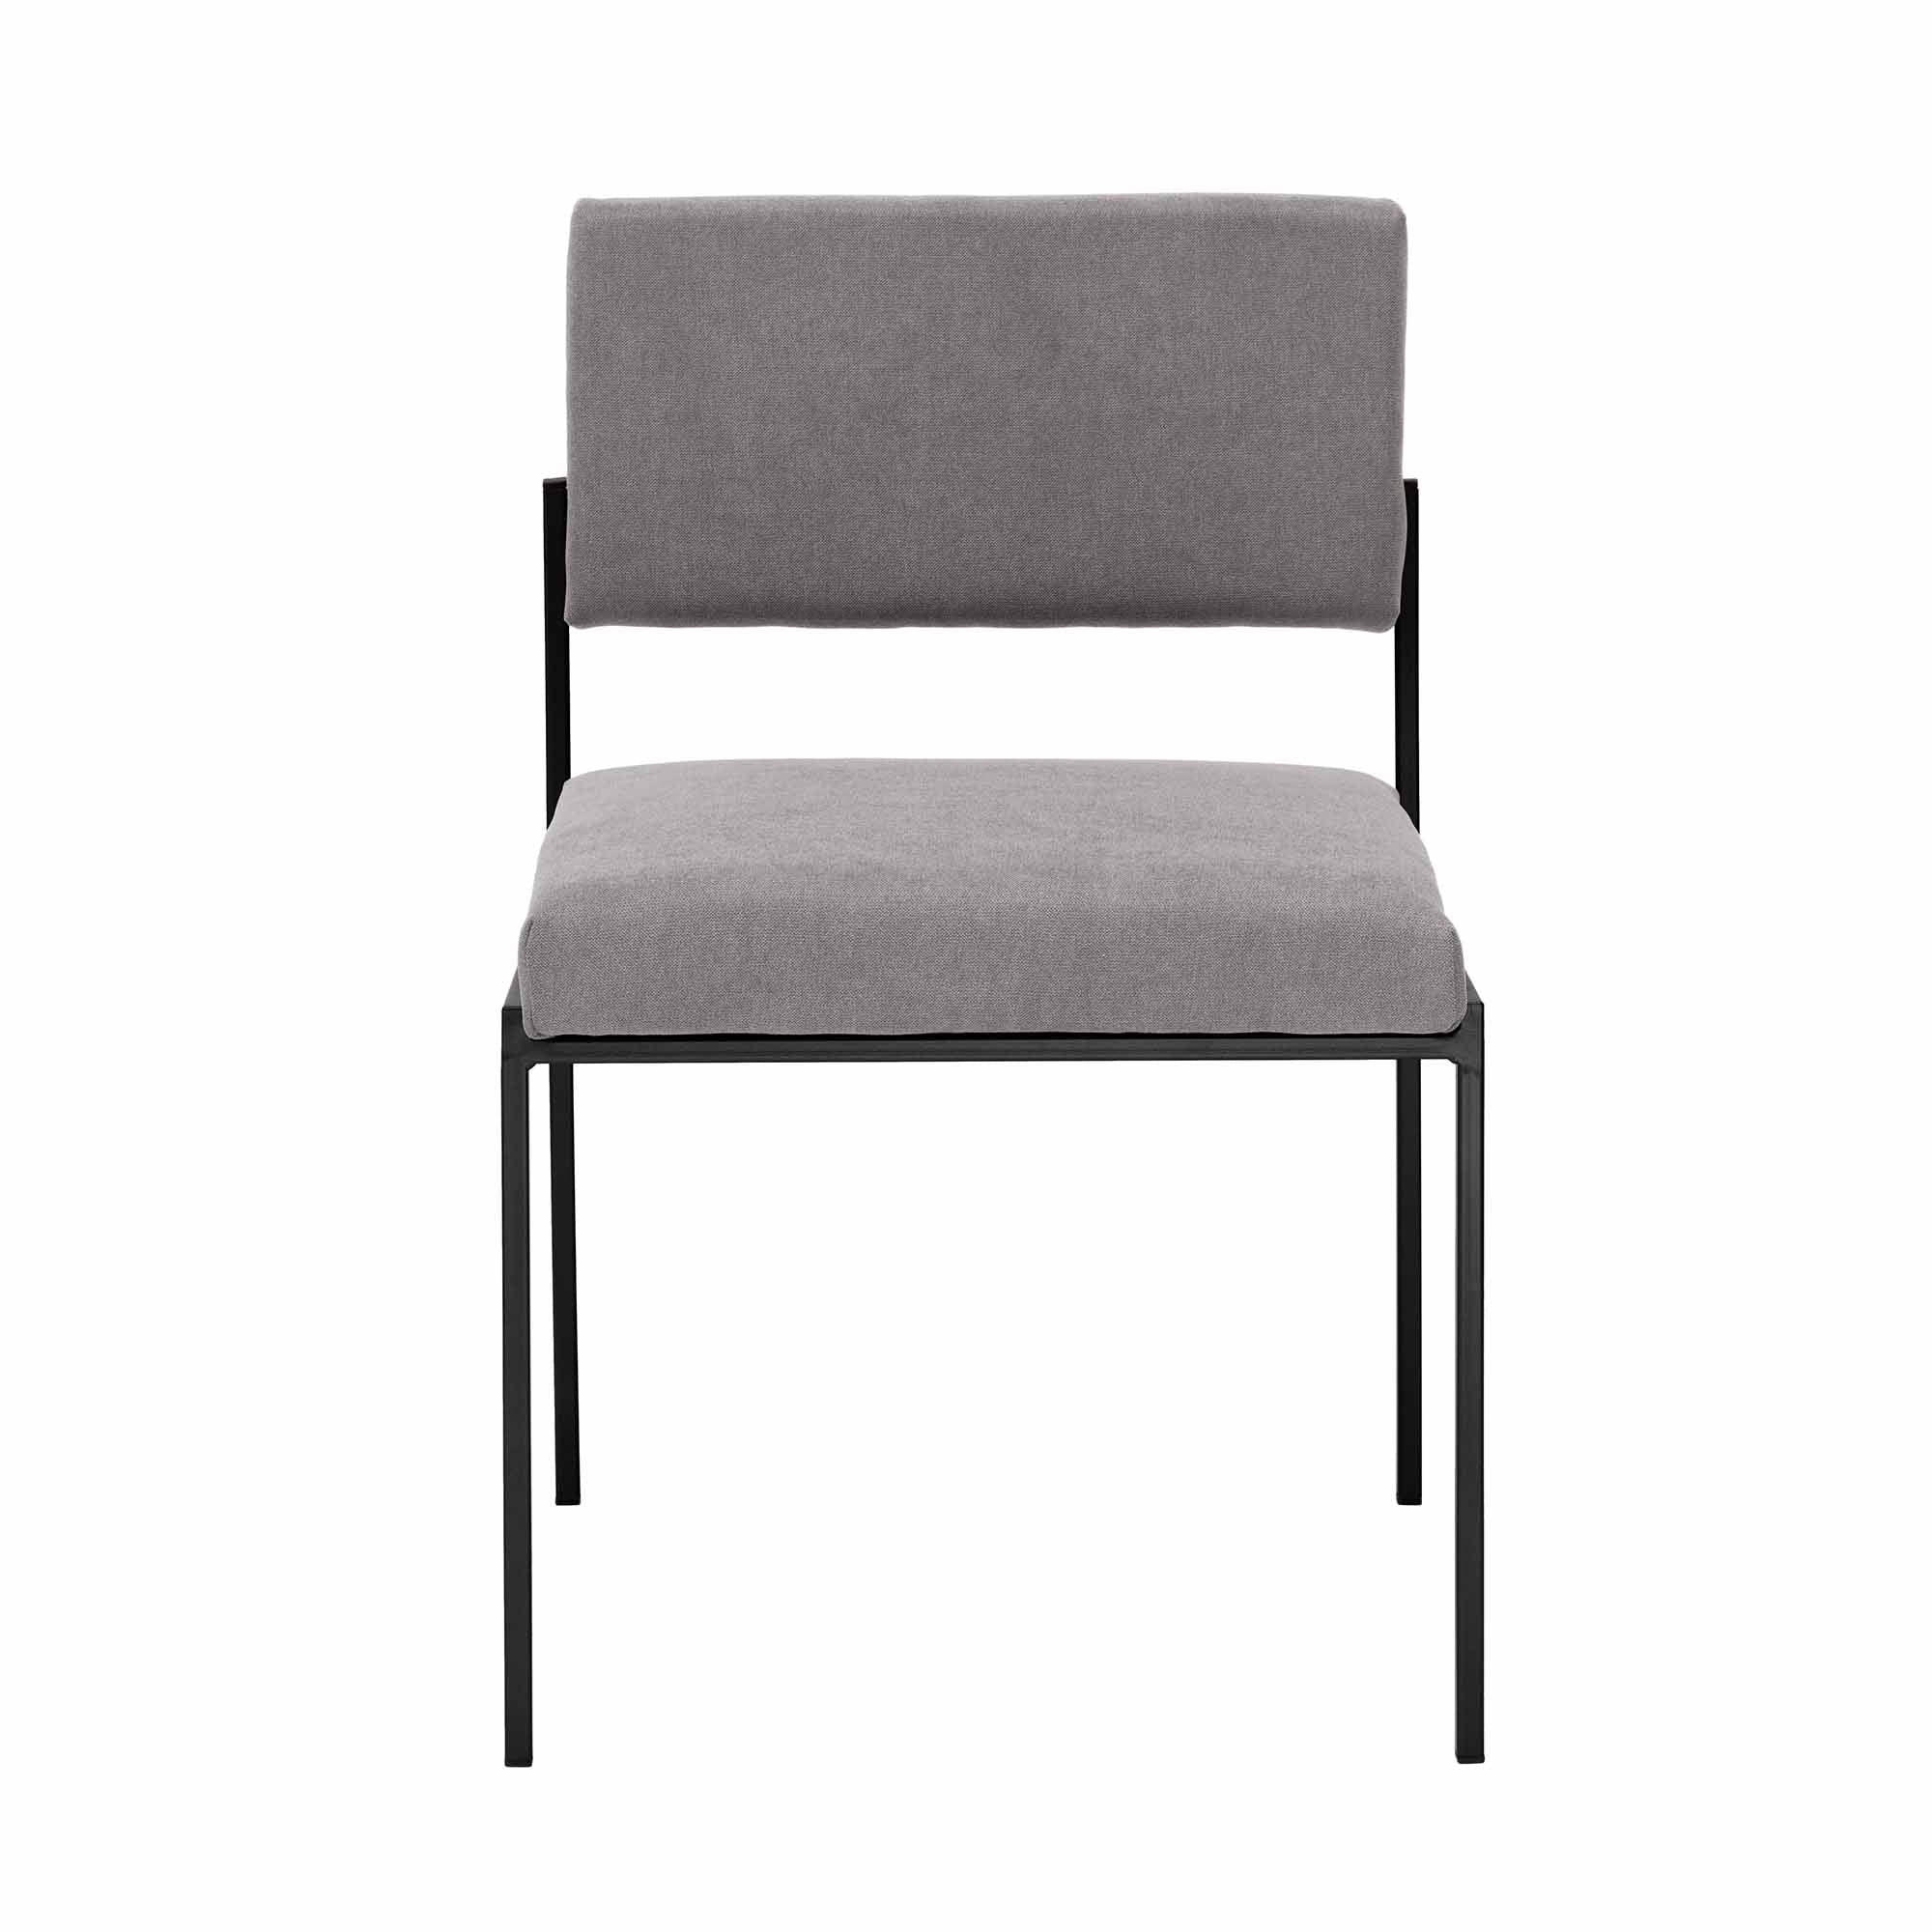  Chair, Powder-Coated Steel Frame, front view grey fabric, black frame